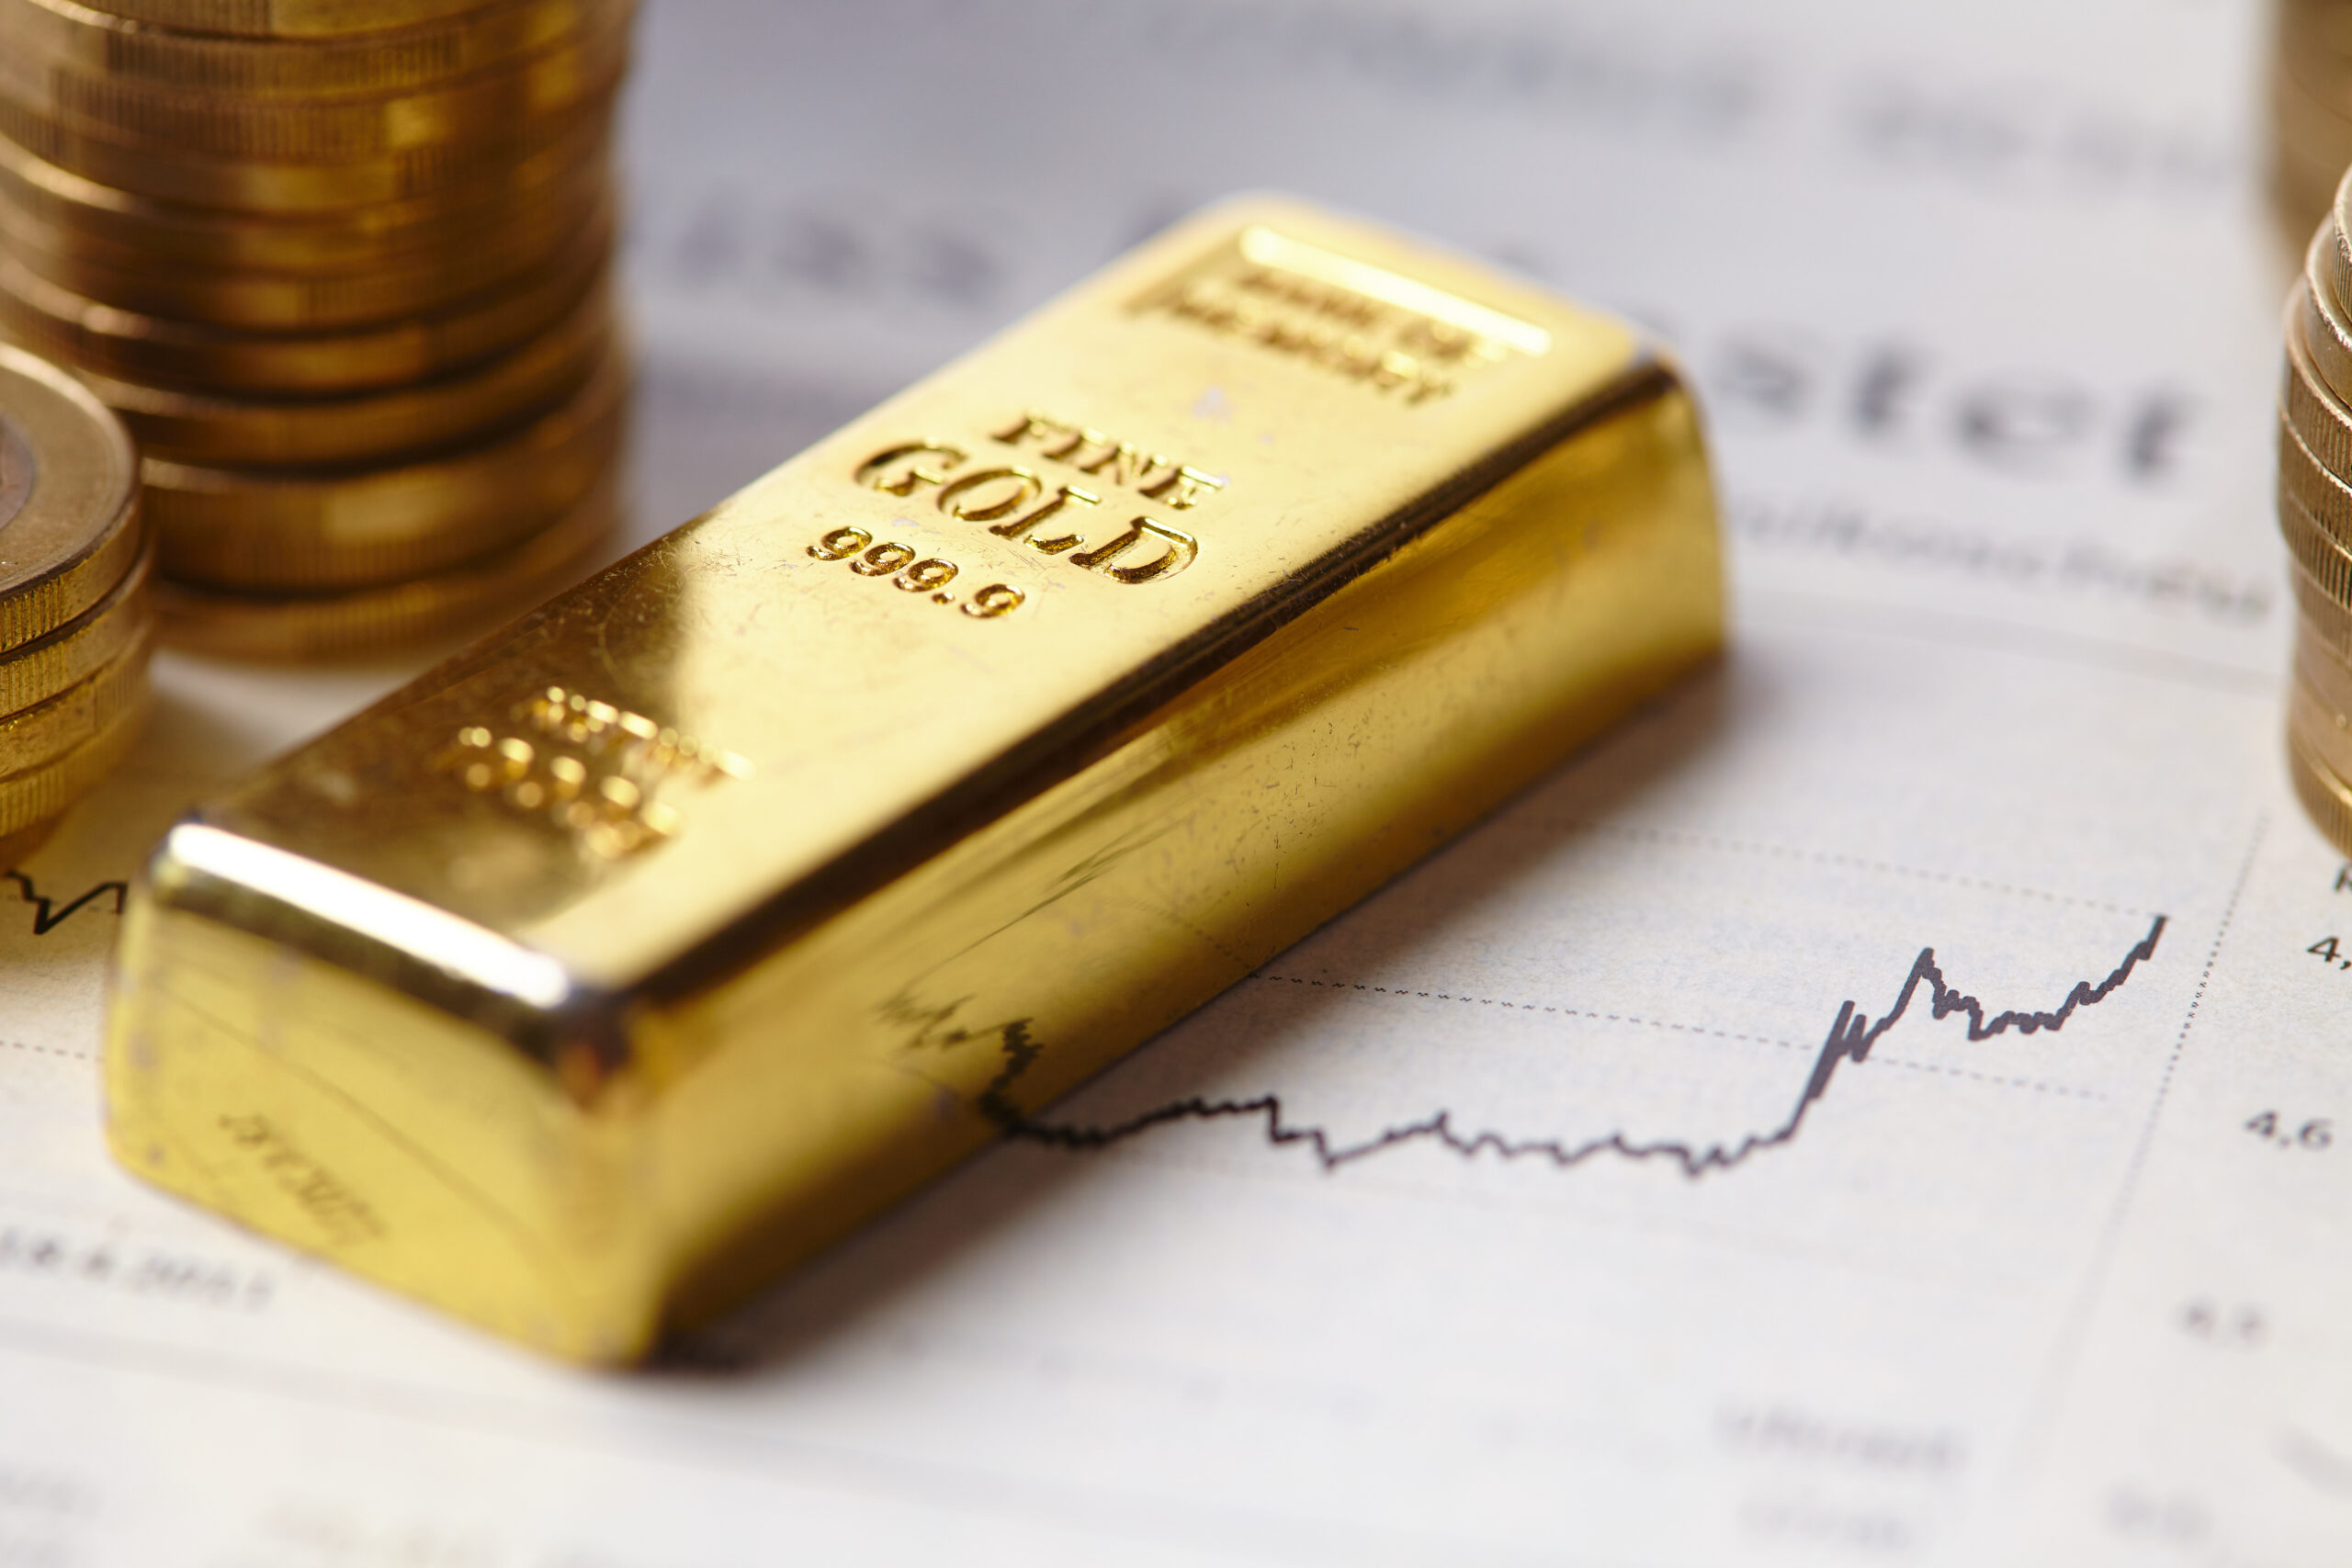 Gold price per ounce is over 2,000 dollars, again